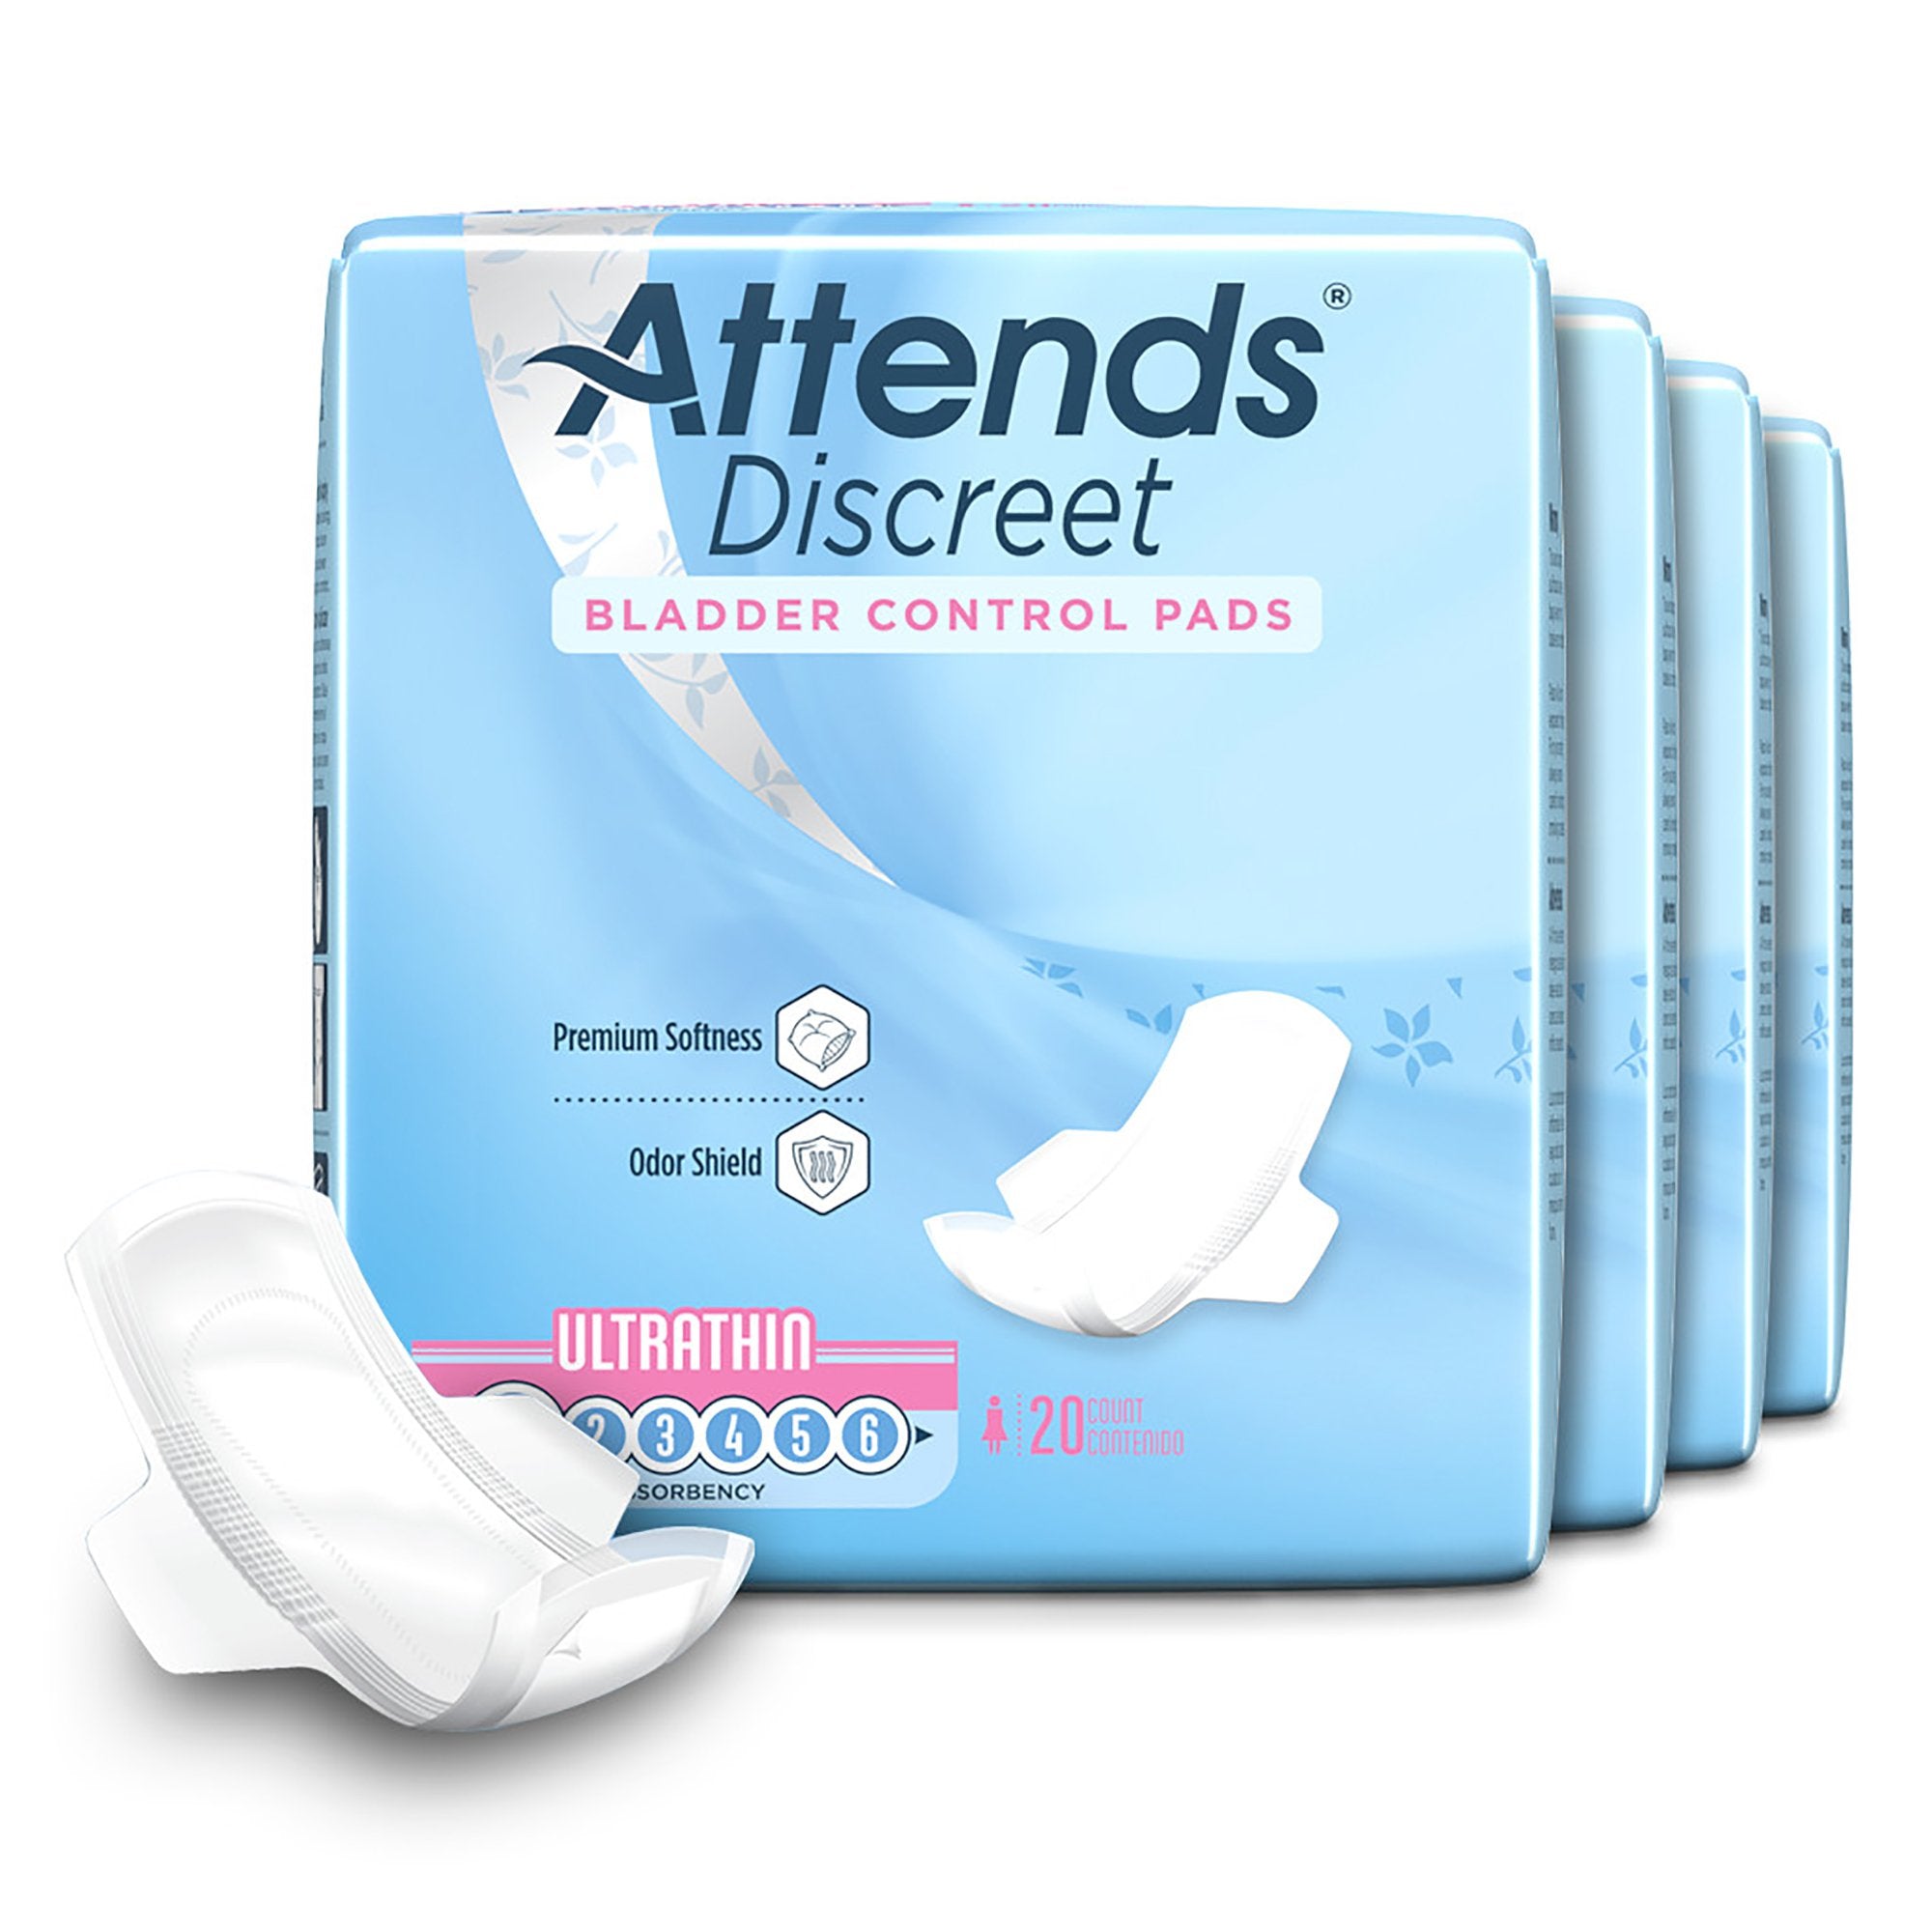 Bladder Control Pad Attends Discreet Ultra Thin 9 Inch Length Light Absorbency Polymer Core One Size Fits Most